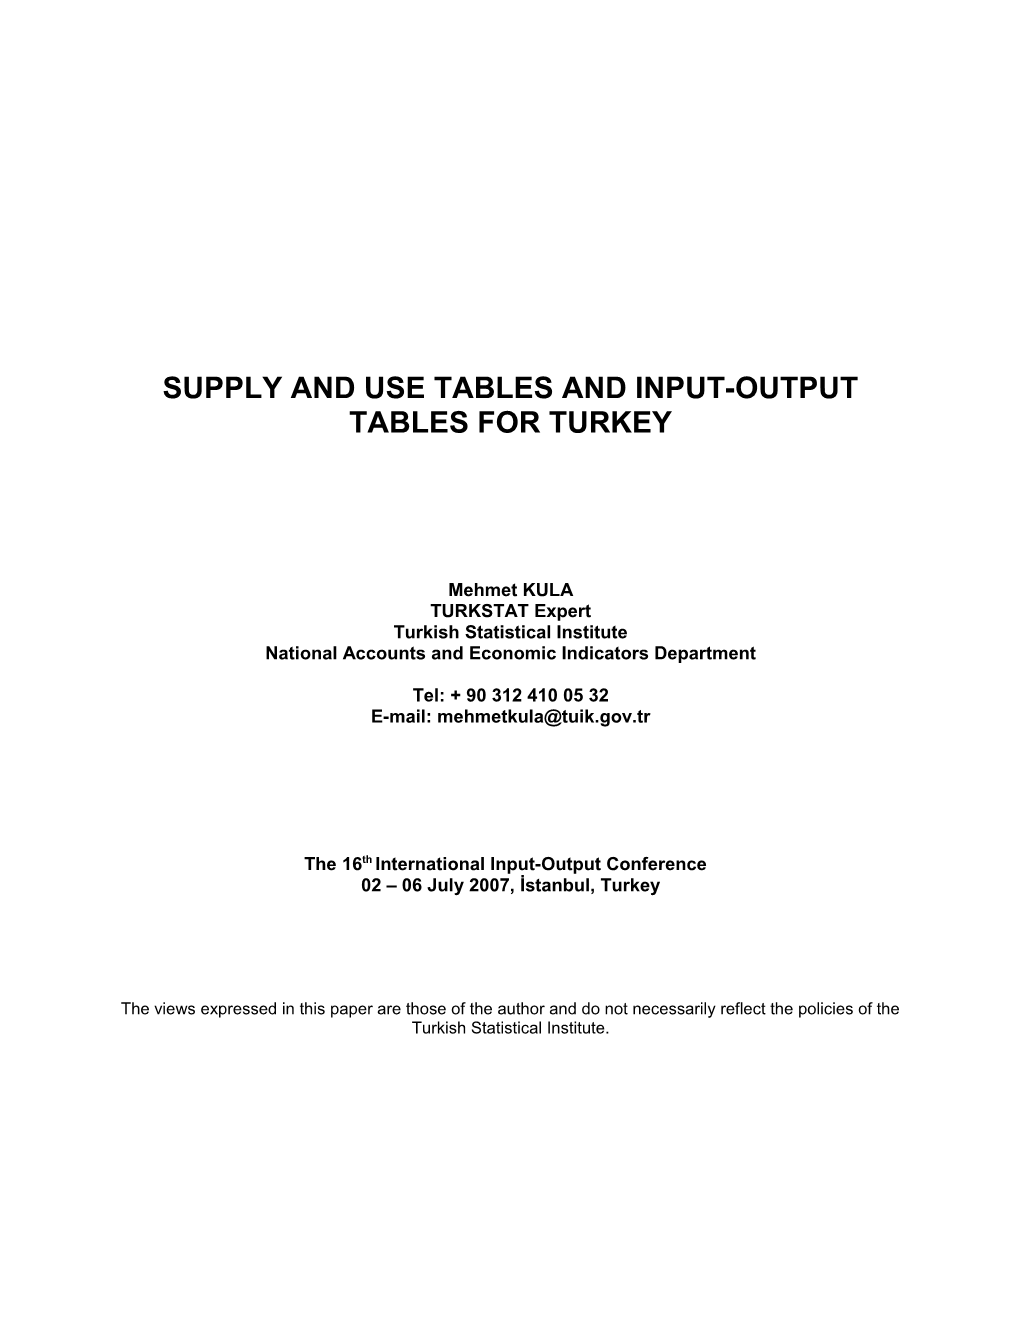 Supply and Use Tables for Turkey